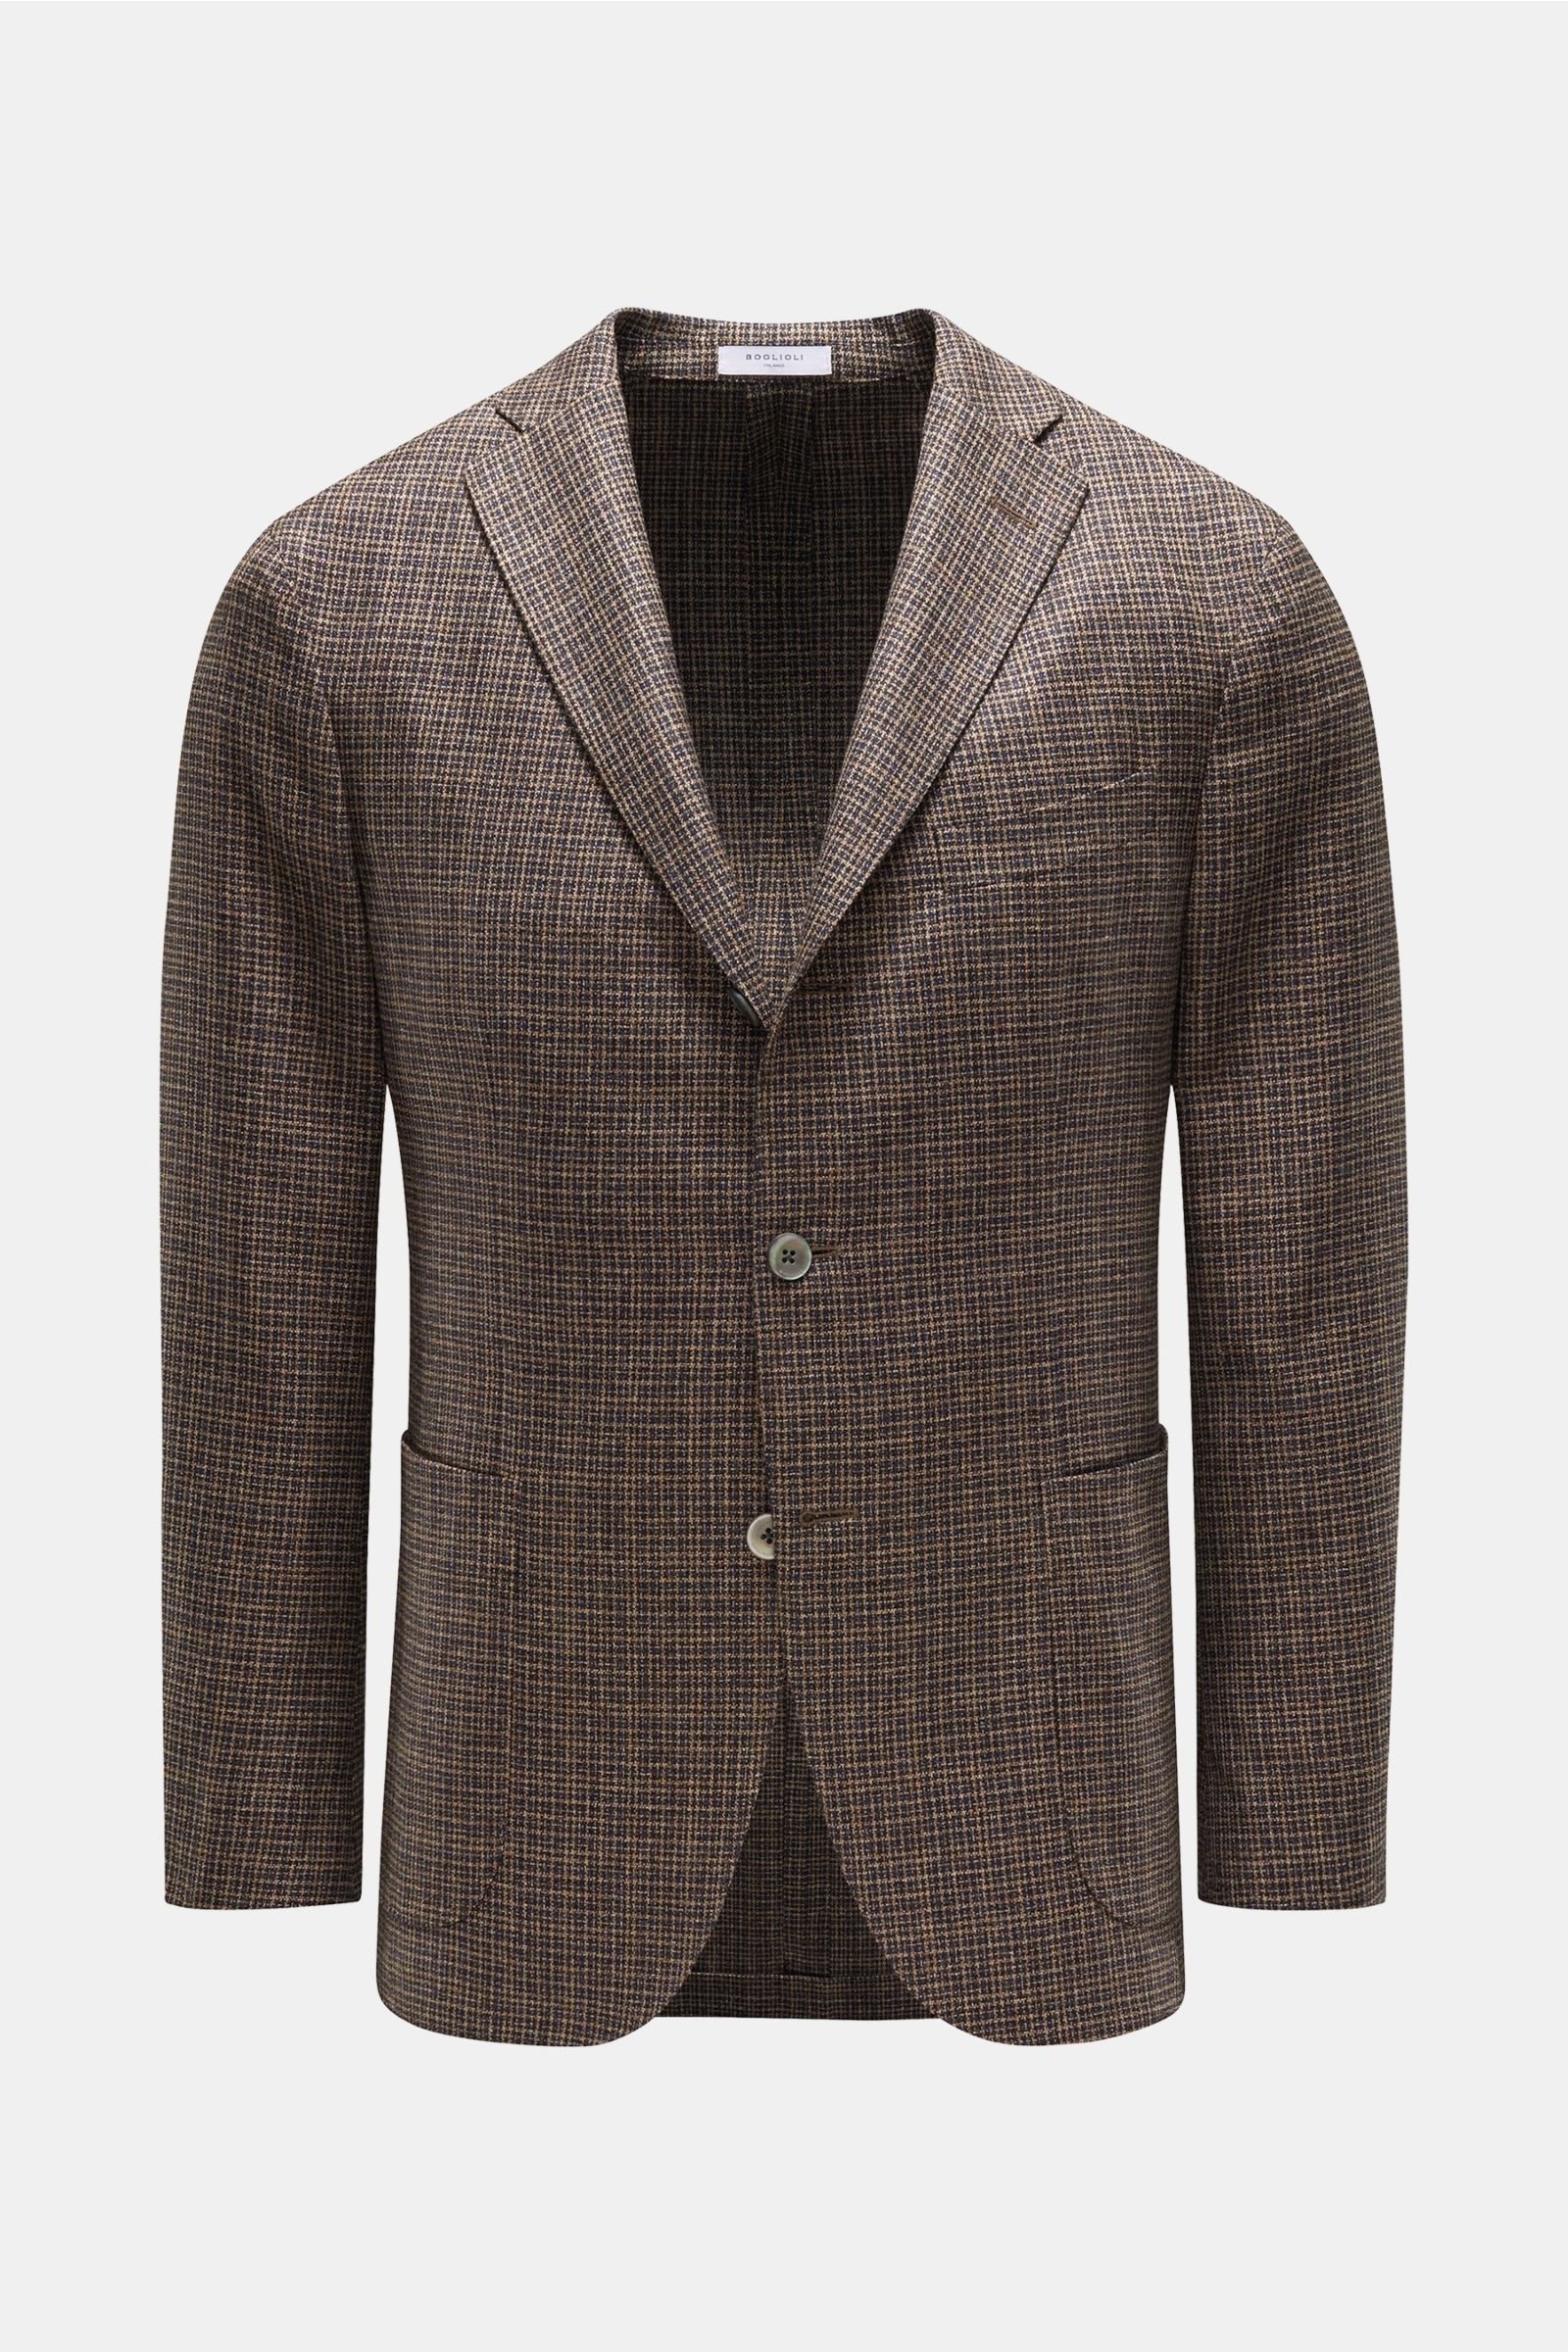 Smart-casual jacket light brown/navy checked